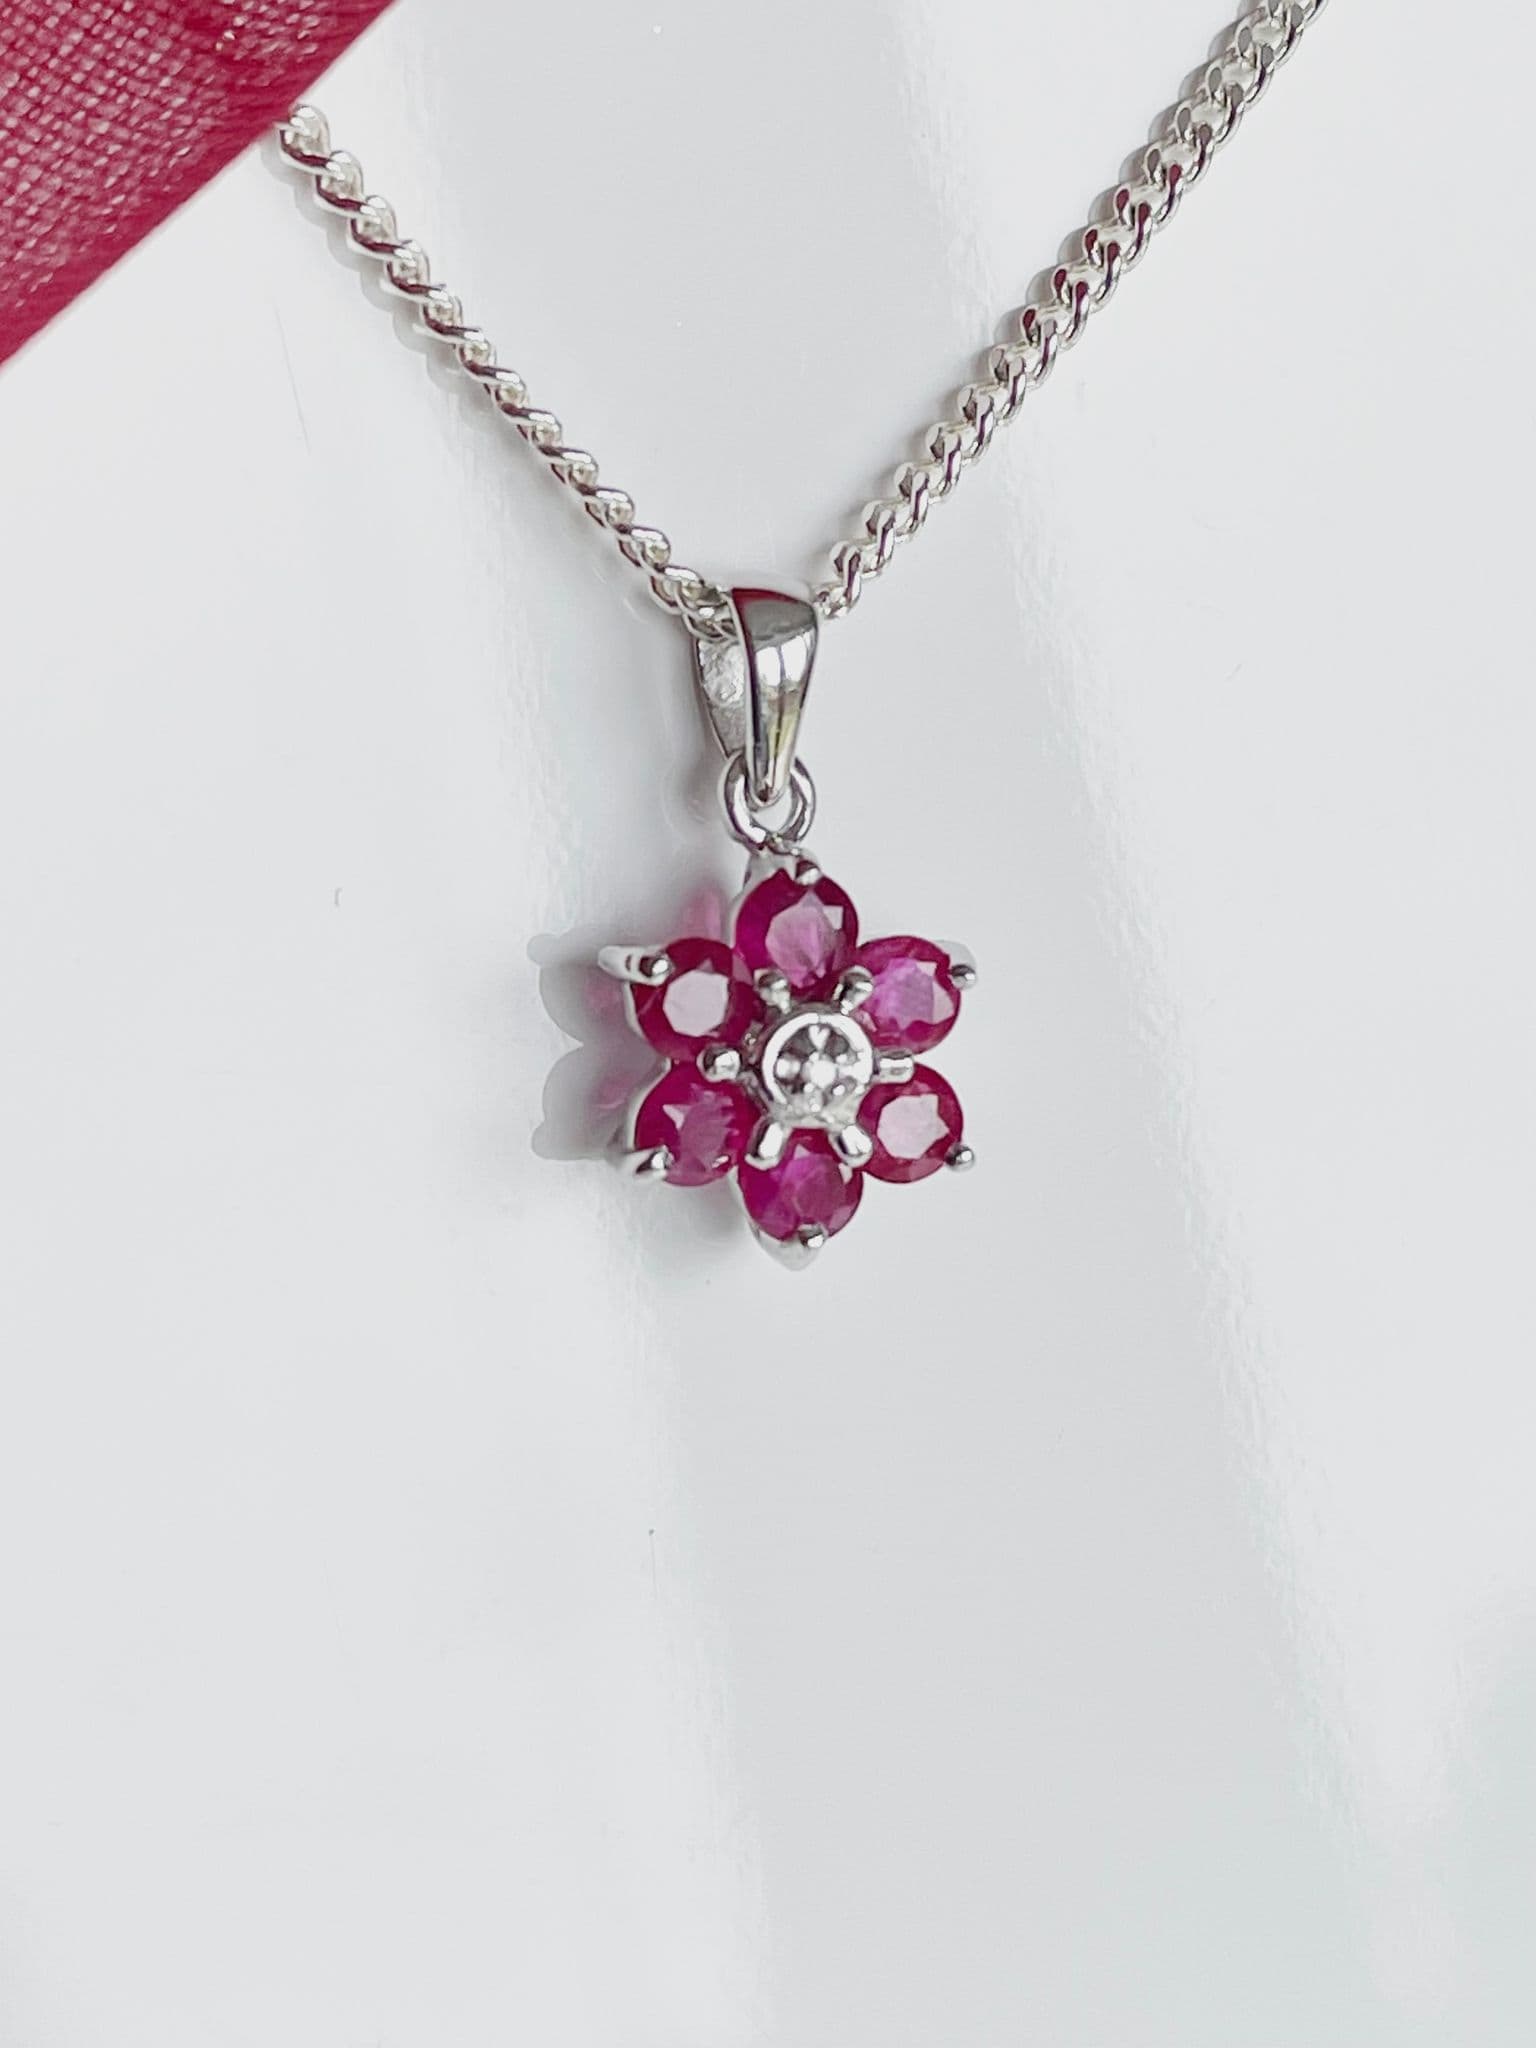 Necklace Round Ruby And Diamond Sterling Silver Red Pendant